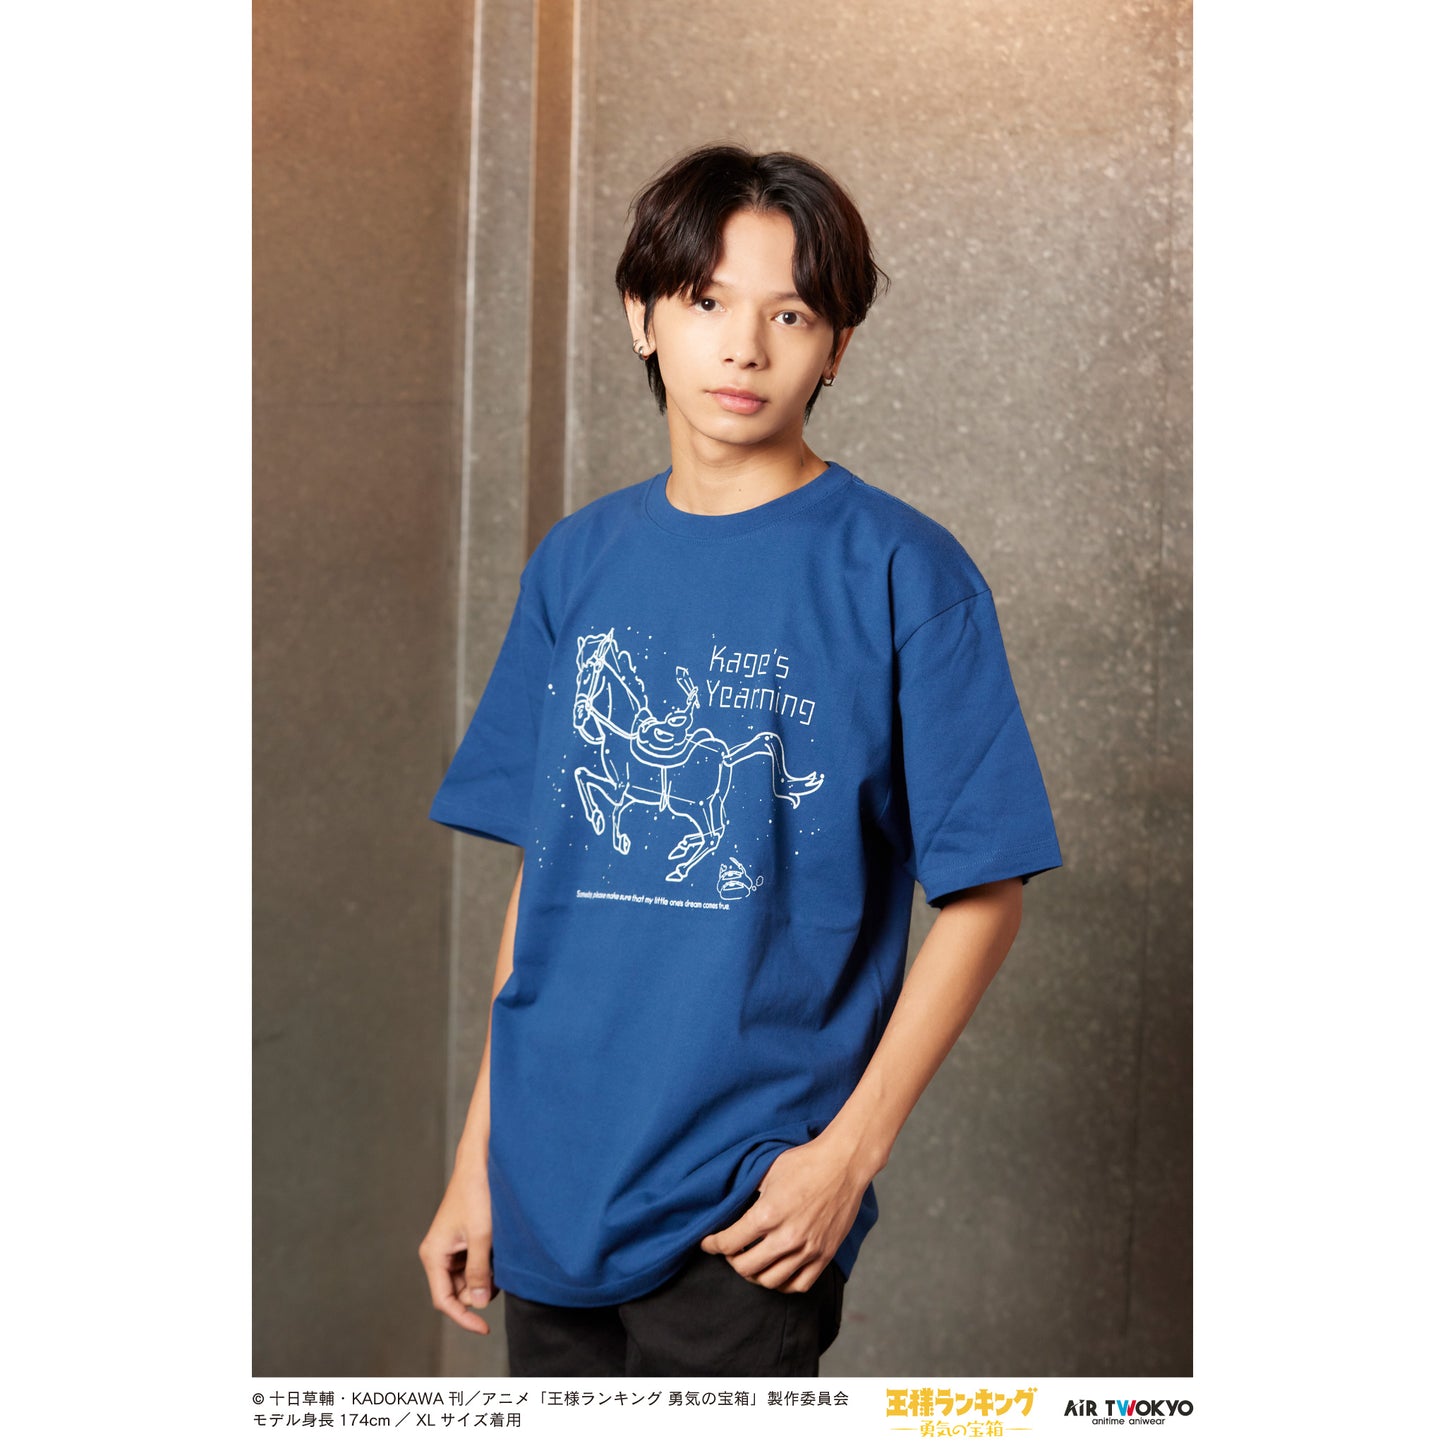 “Ranking of Kings: The Treasure Chest of Courage” scene illustration T-shirt 5